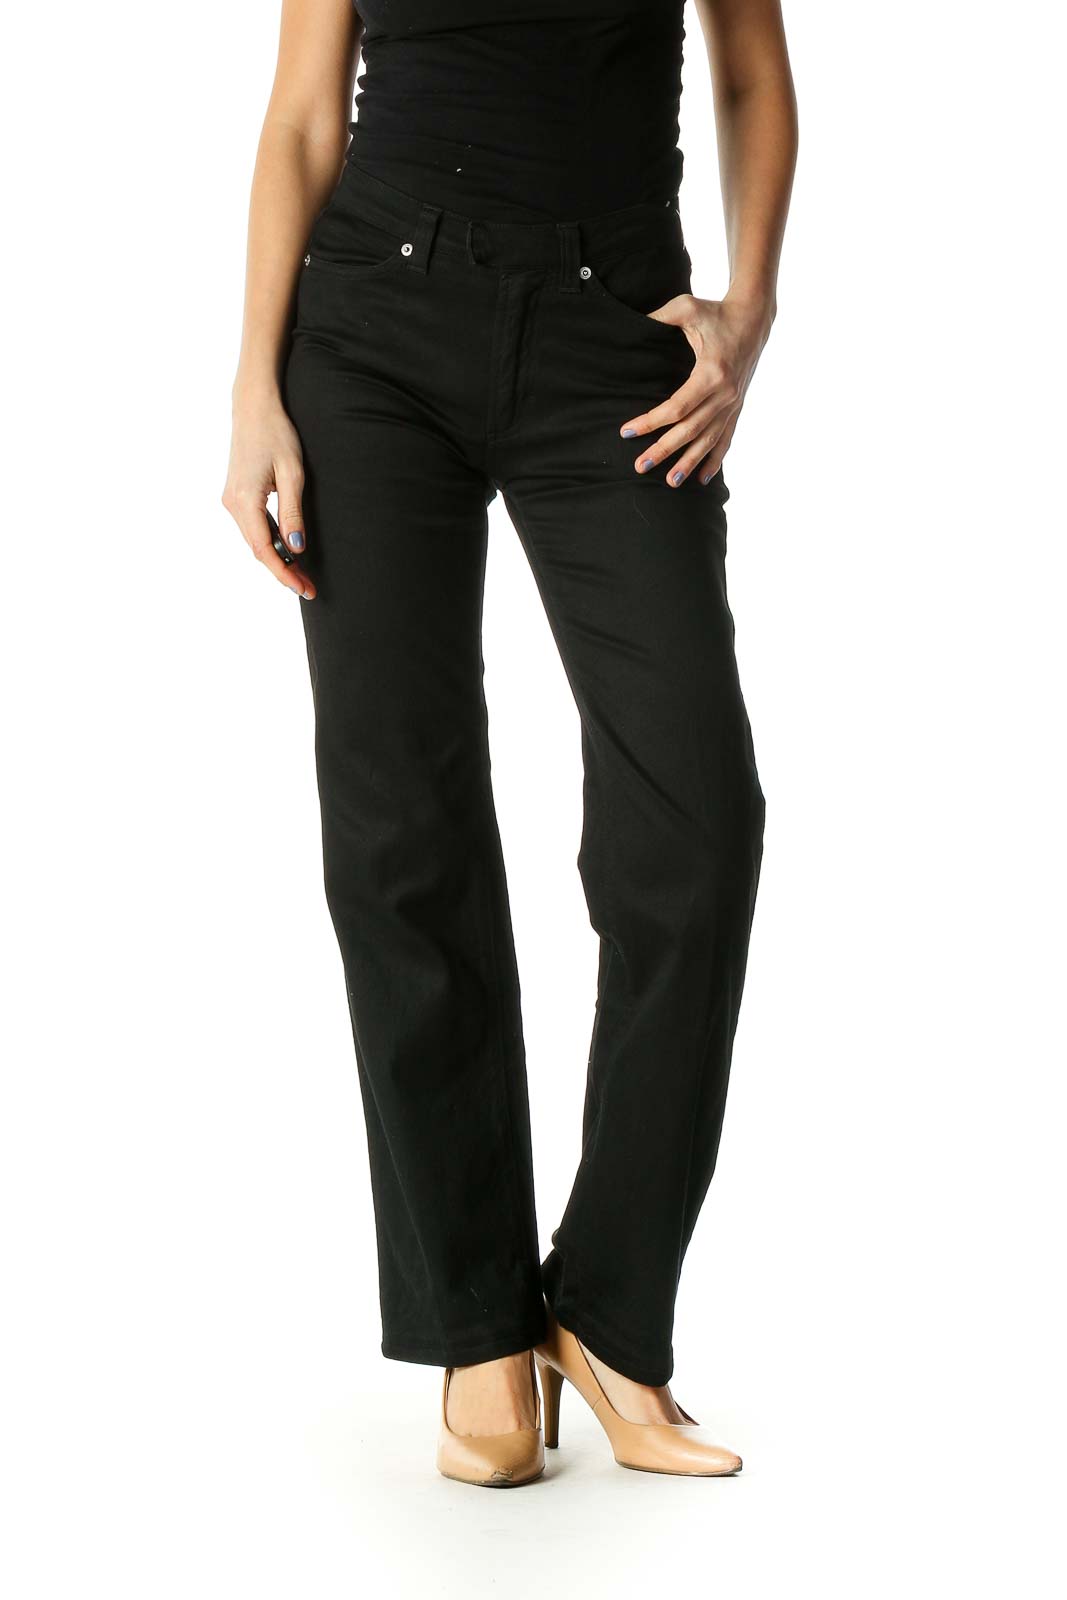 Black Solid Casual Trousers Front